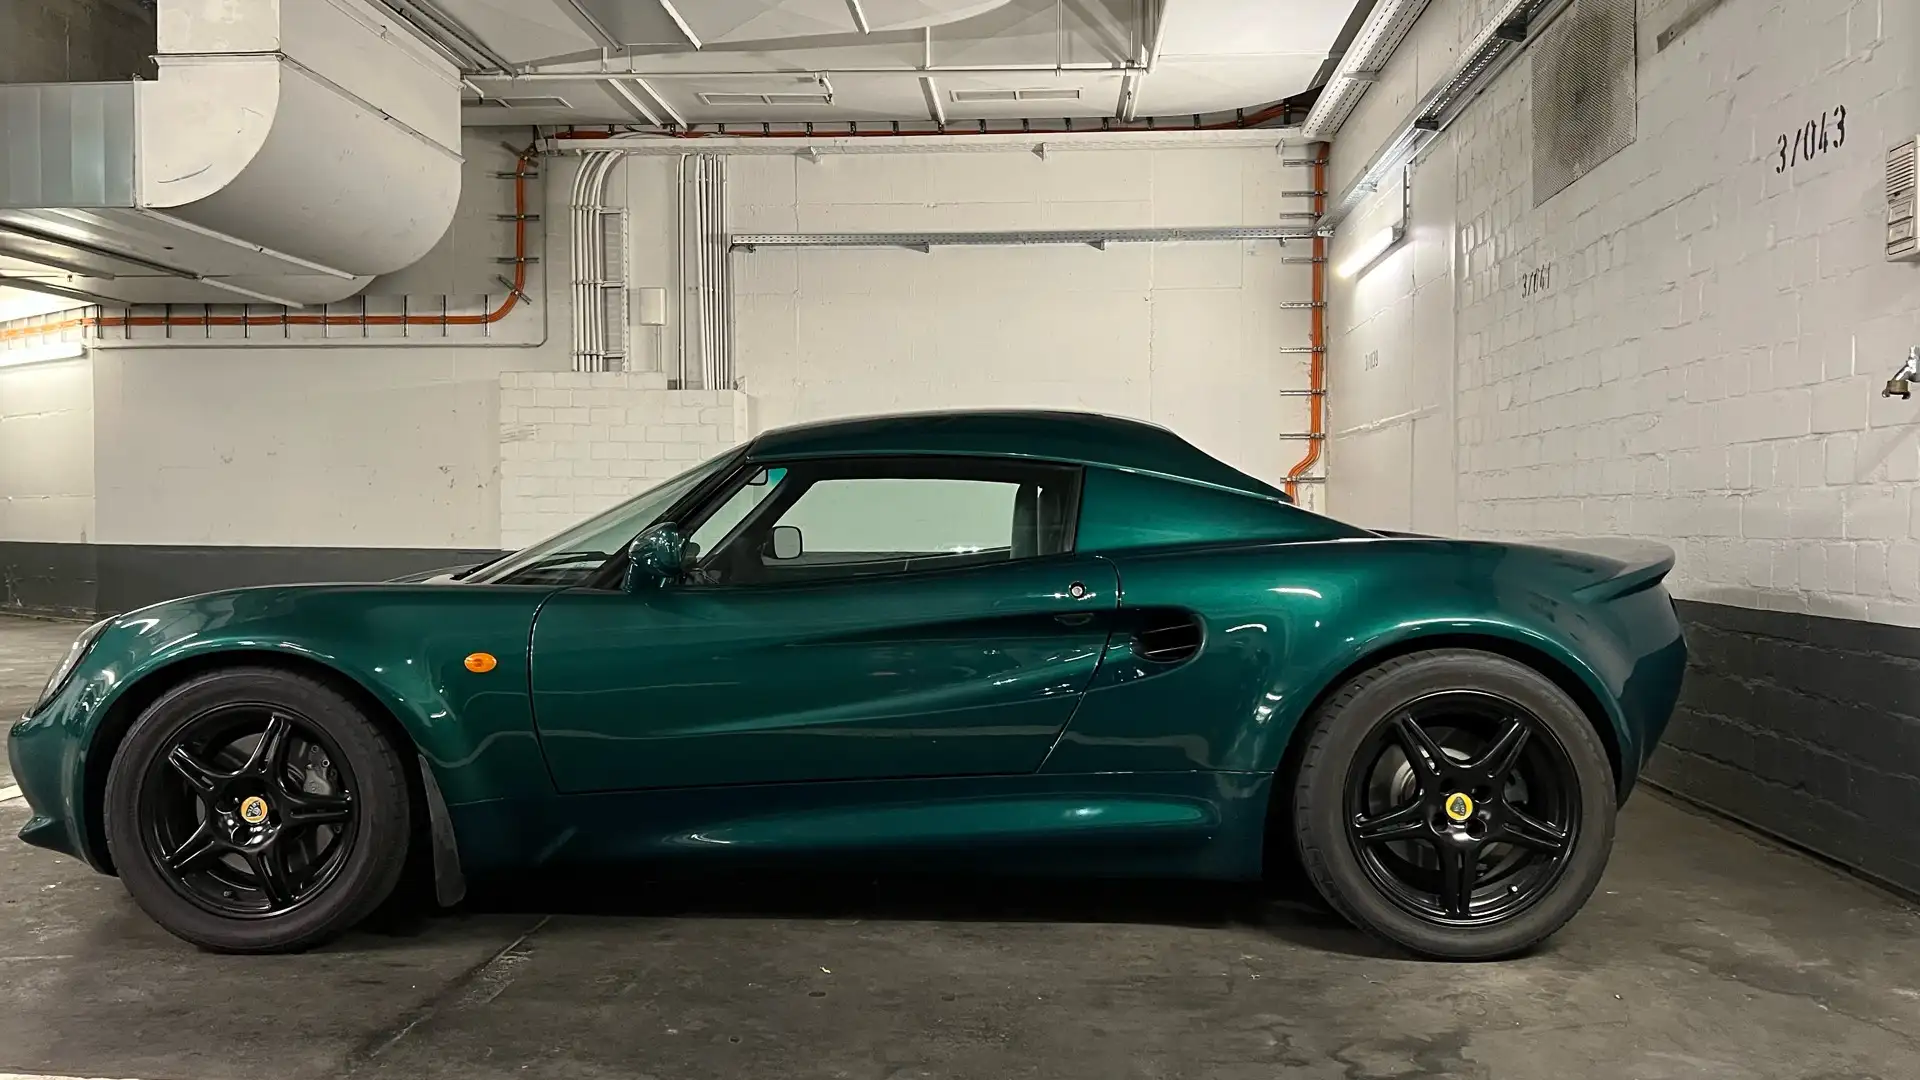 Lotus Elise LHD, Rotec, sehr guter Zustand Groen - 2